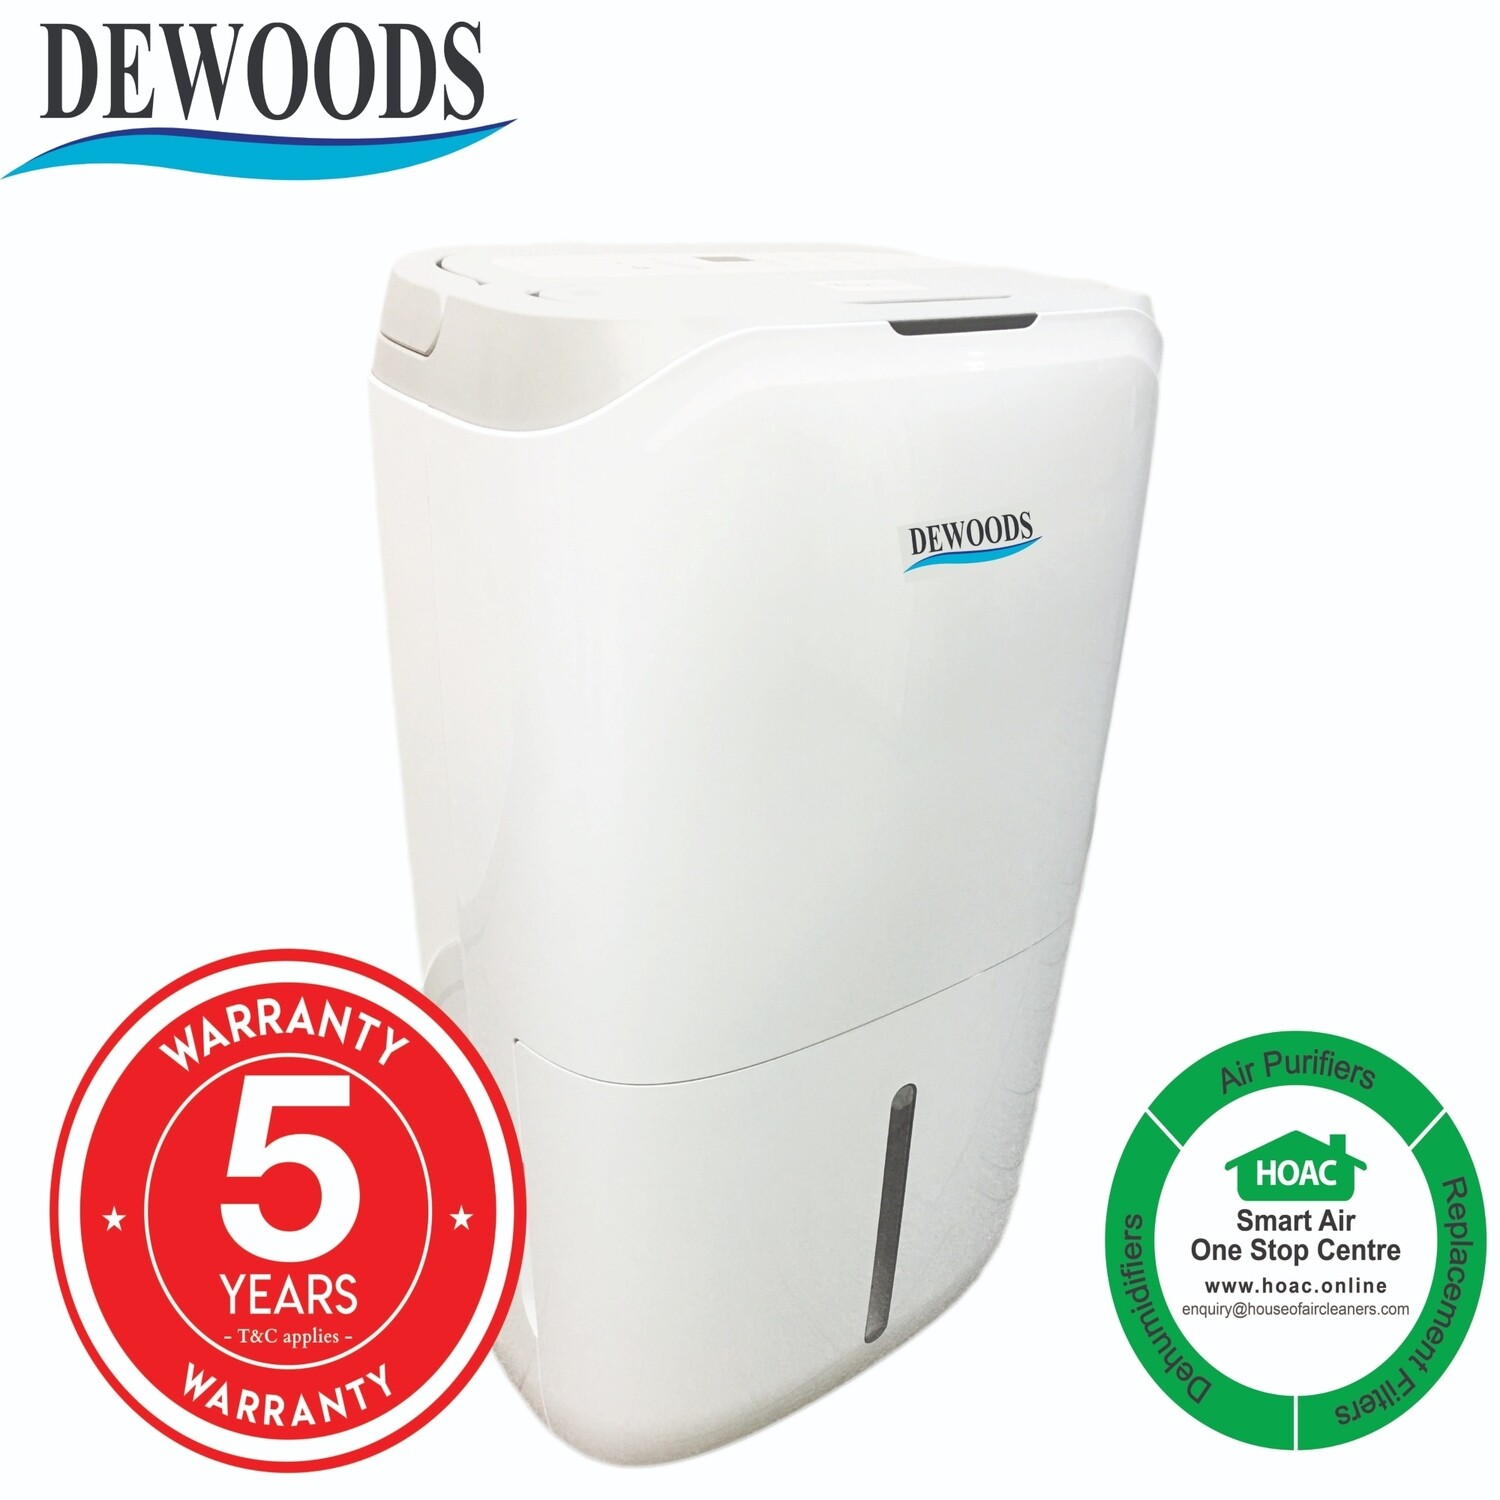 DEWOODS Dehumidifier MDH-20A (20 Litres) With 5 YEARS WARRANTY